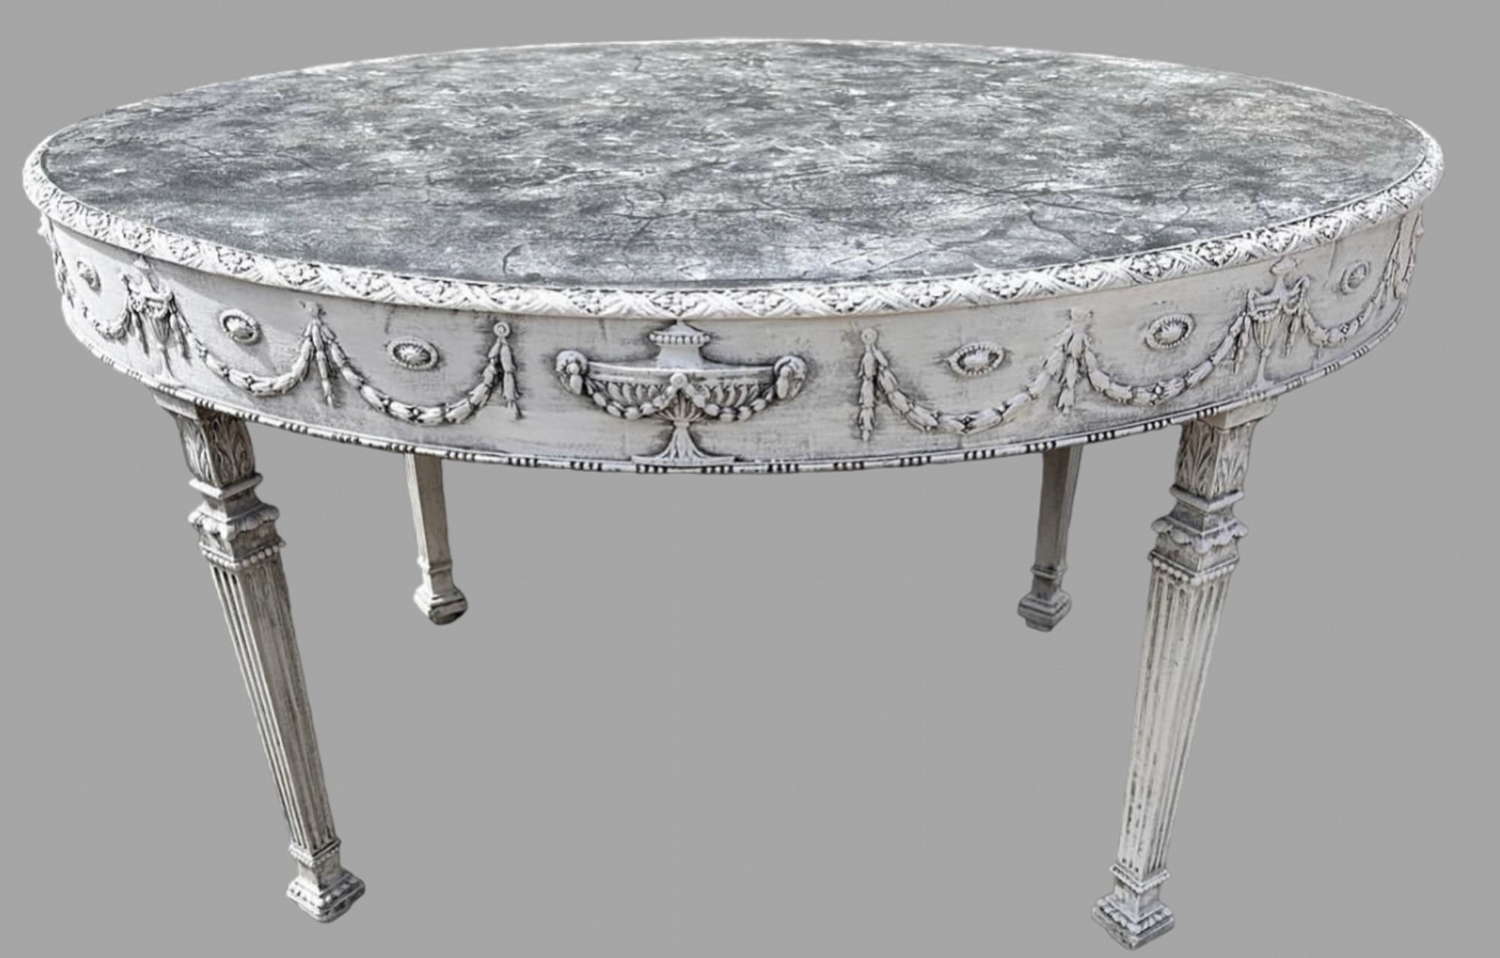 A c1880 Painted Oval Centre Table